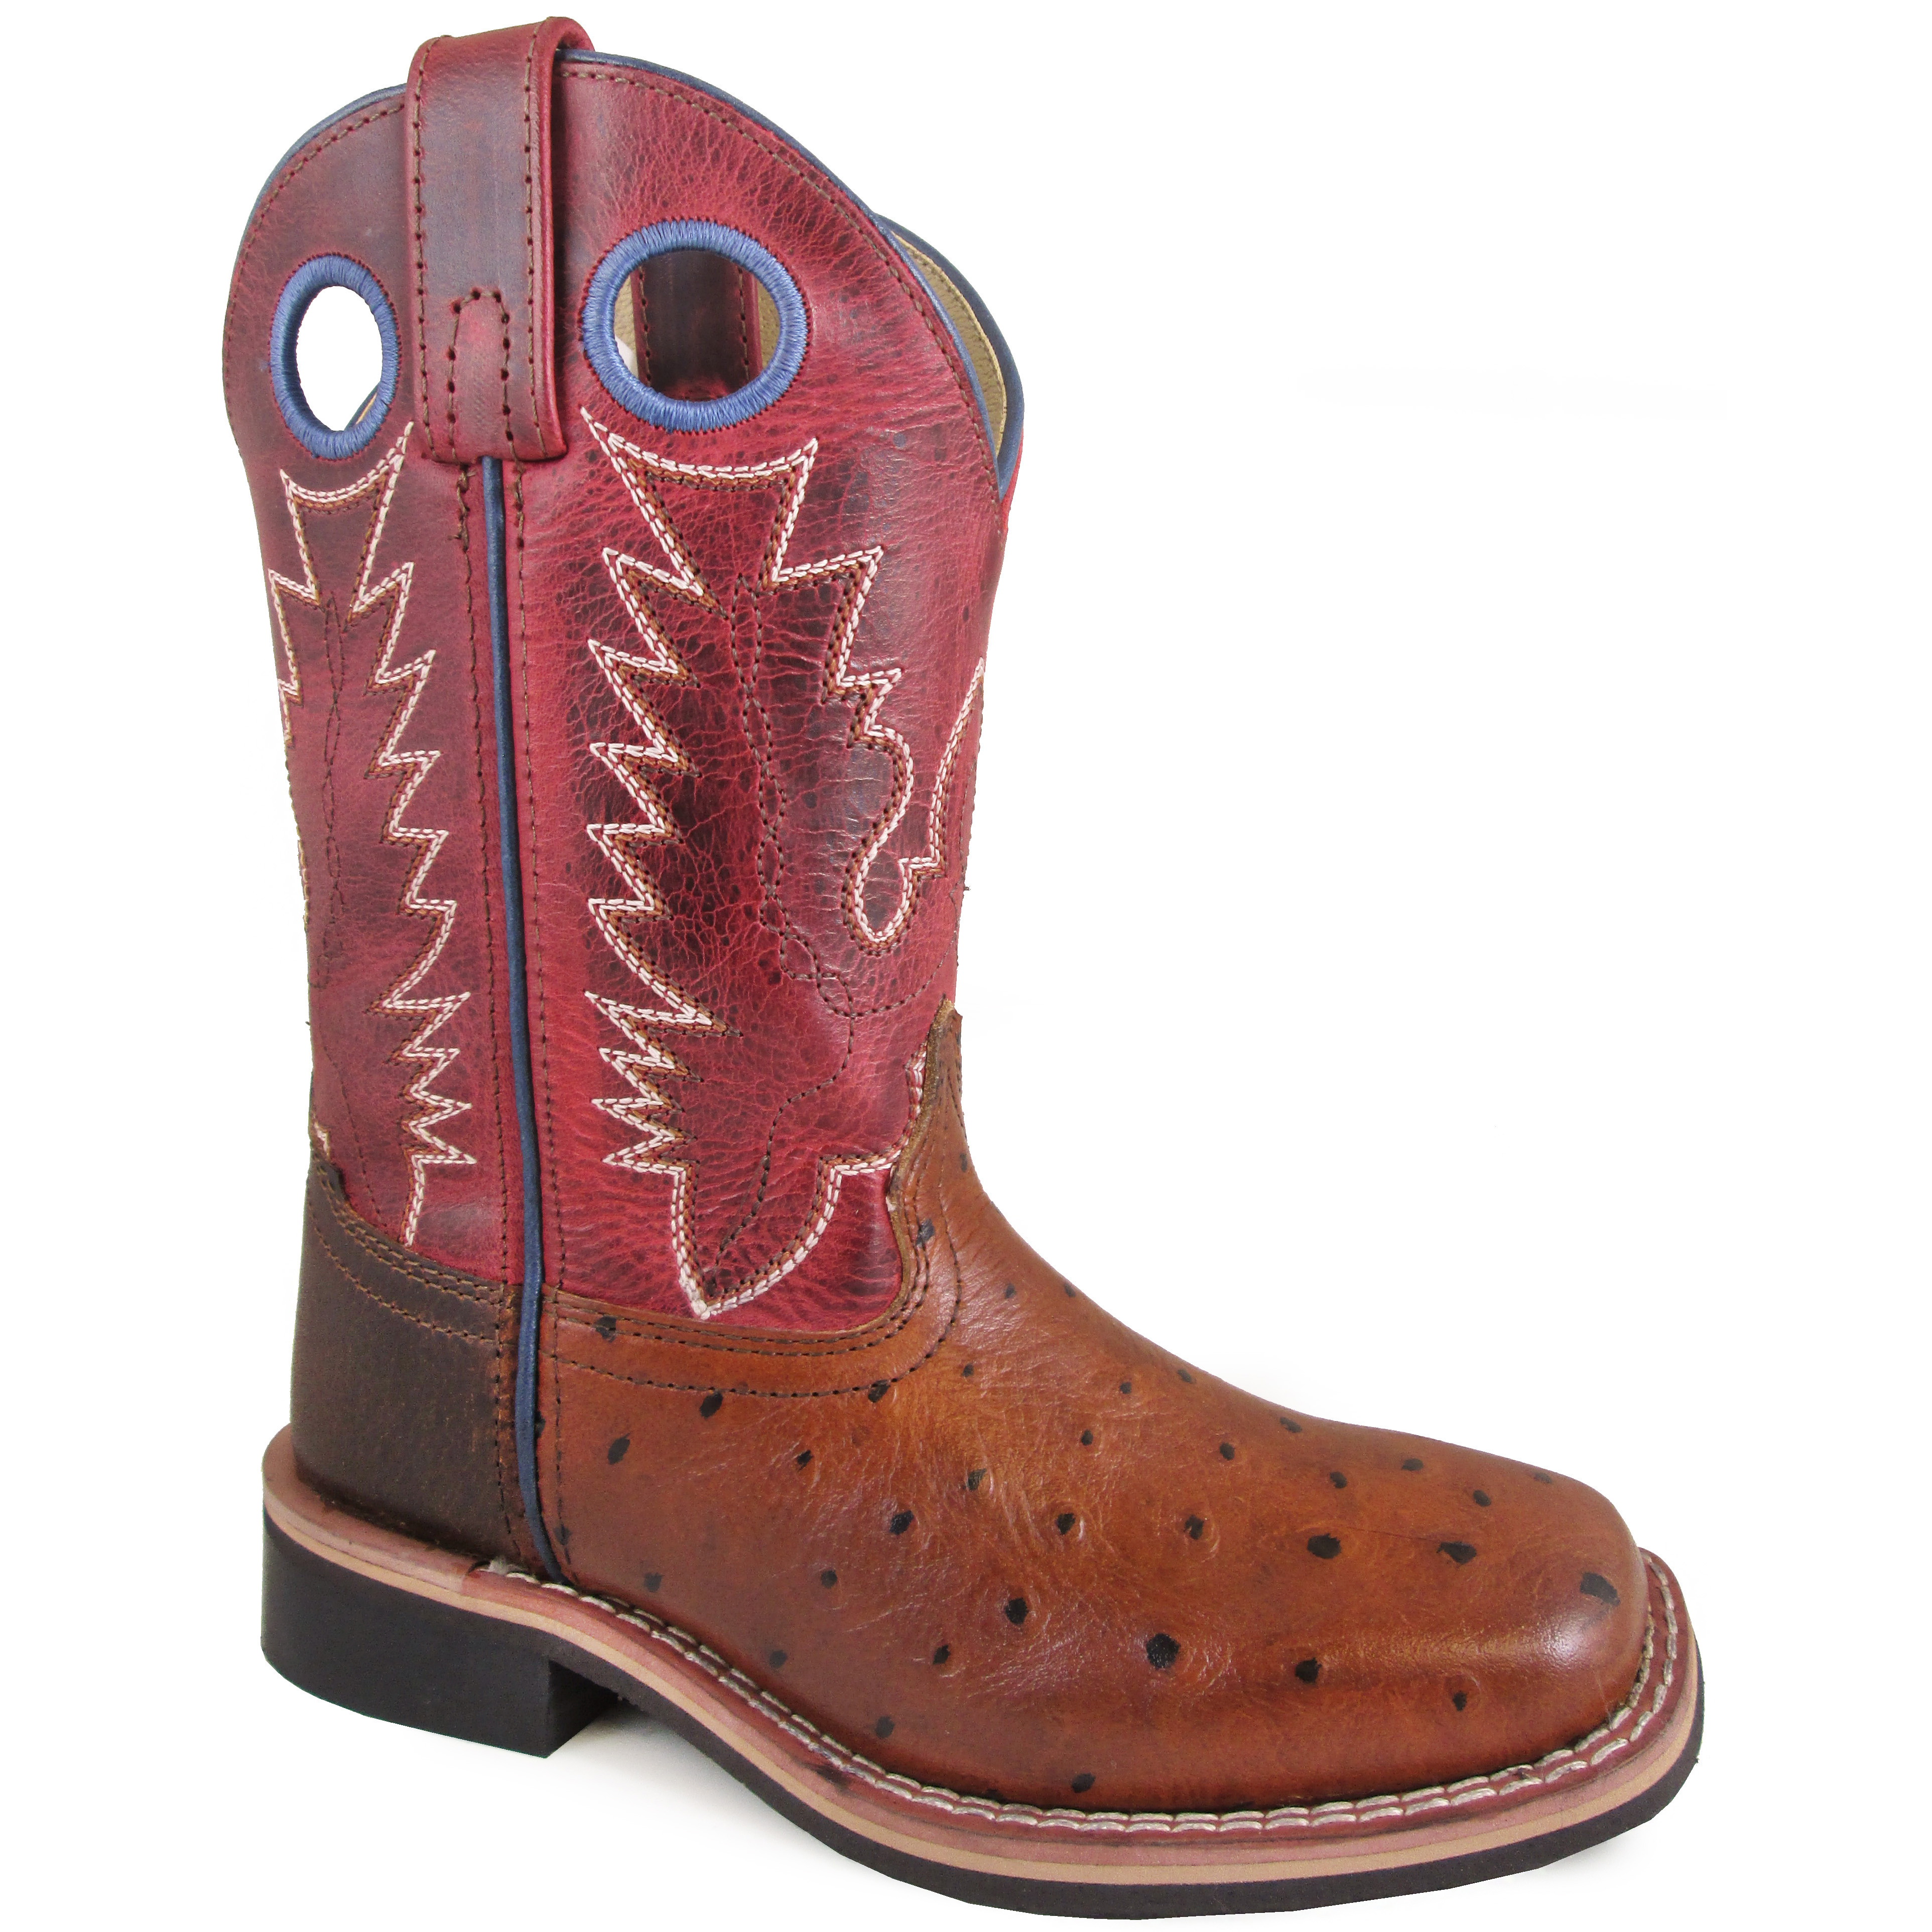 Smoky Mountain Boots Kid's Cheyenne Cognac/Red Crackle Leather Cowboy Boot